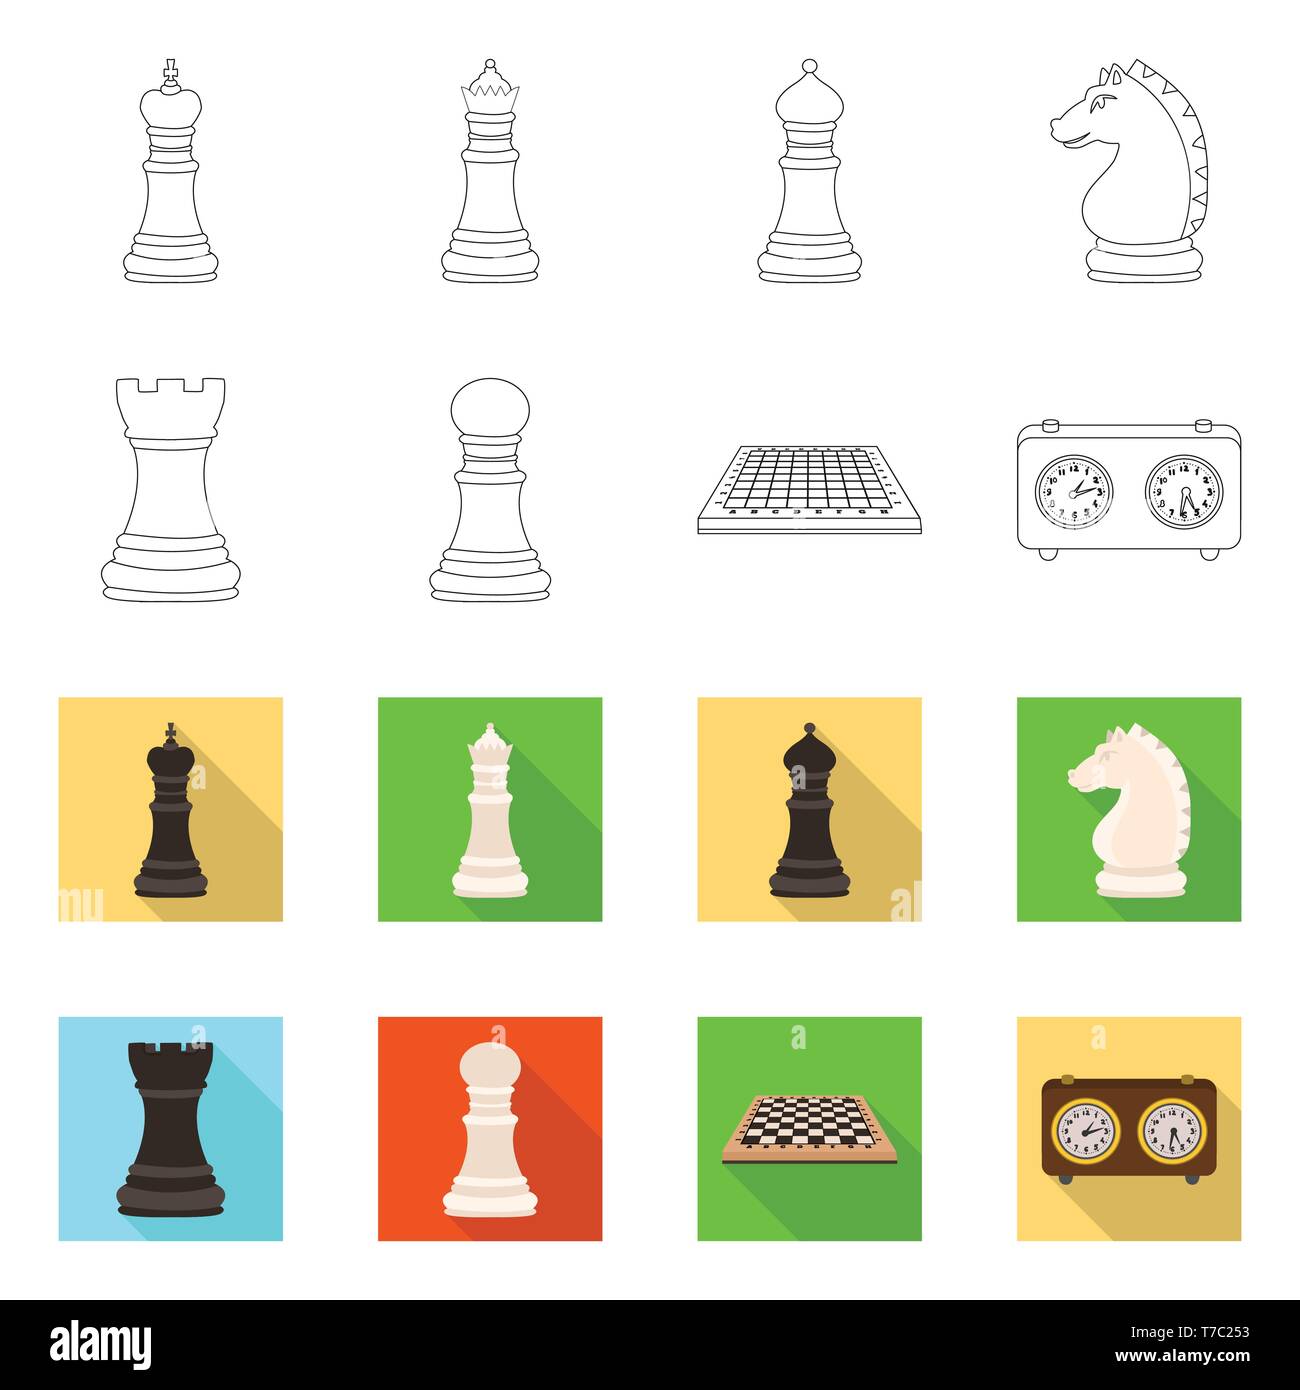 king,queen,bishop,knight,rook,pawn,chessboard,clock,board,strategic,horse,black,timer,white,championship,castle,checkerboard,speed,business,mate,tower,figure,empty,leadership,check,head,network,counter,table,button,checkmate,thin,club,target,chess,game,piece,strategy,tactical,play,set,vector,icon,illustration,isolated,collection,design,element,graphic,sign Vector Vectors , Stock Vector